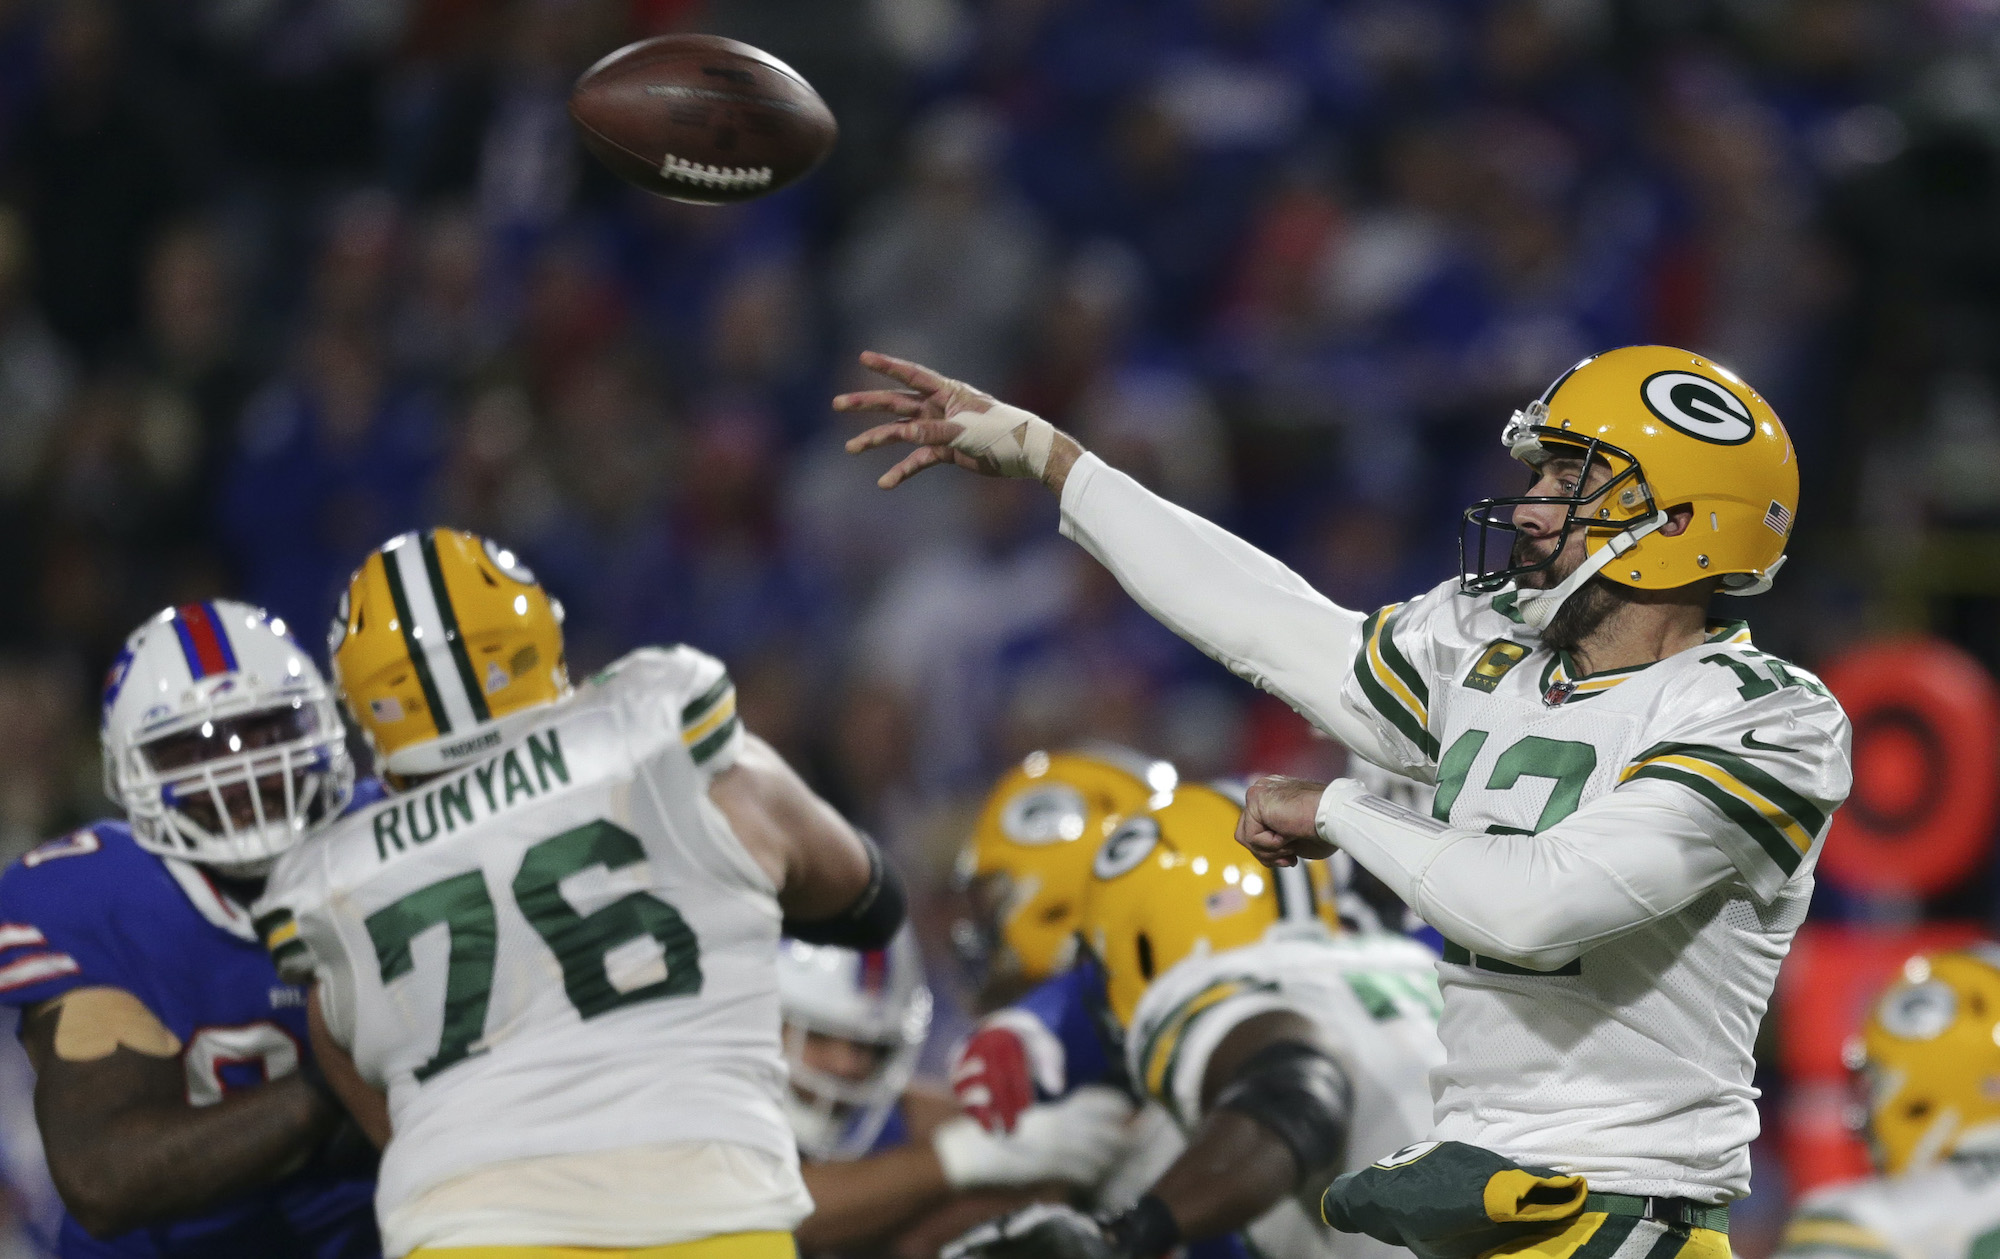 Aaron Rodgers #12 of the Green Bay Packers throws a pass during the fourth quarter against the Buffalo Bills at Highmark Stadium on October 30, 2022 in Orchard Park, New York.